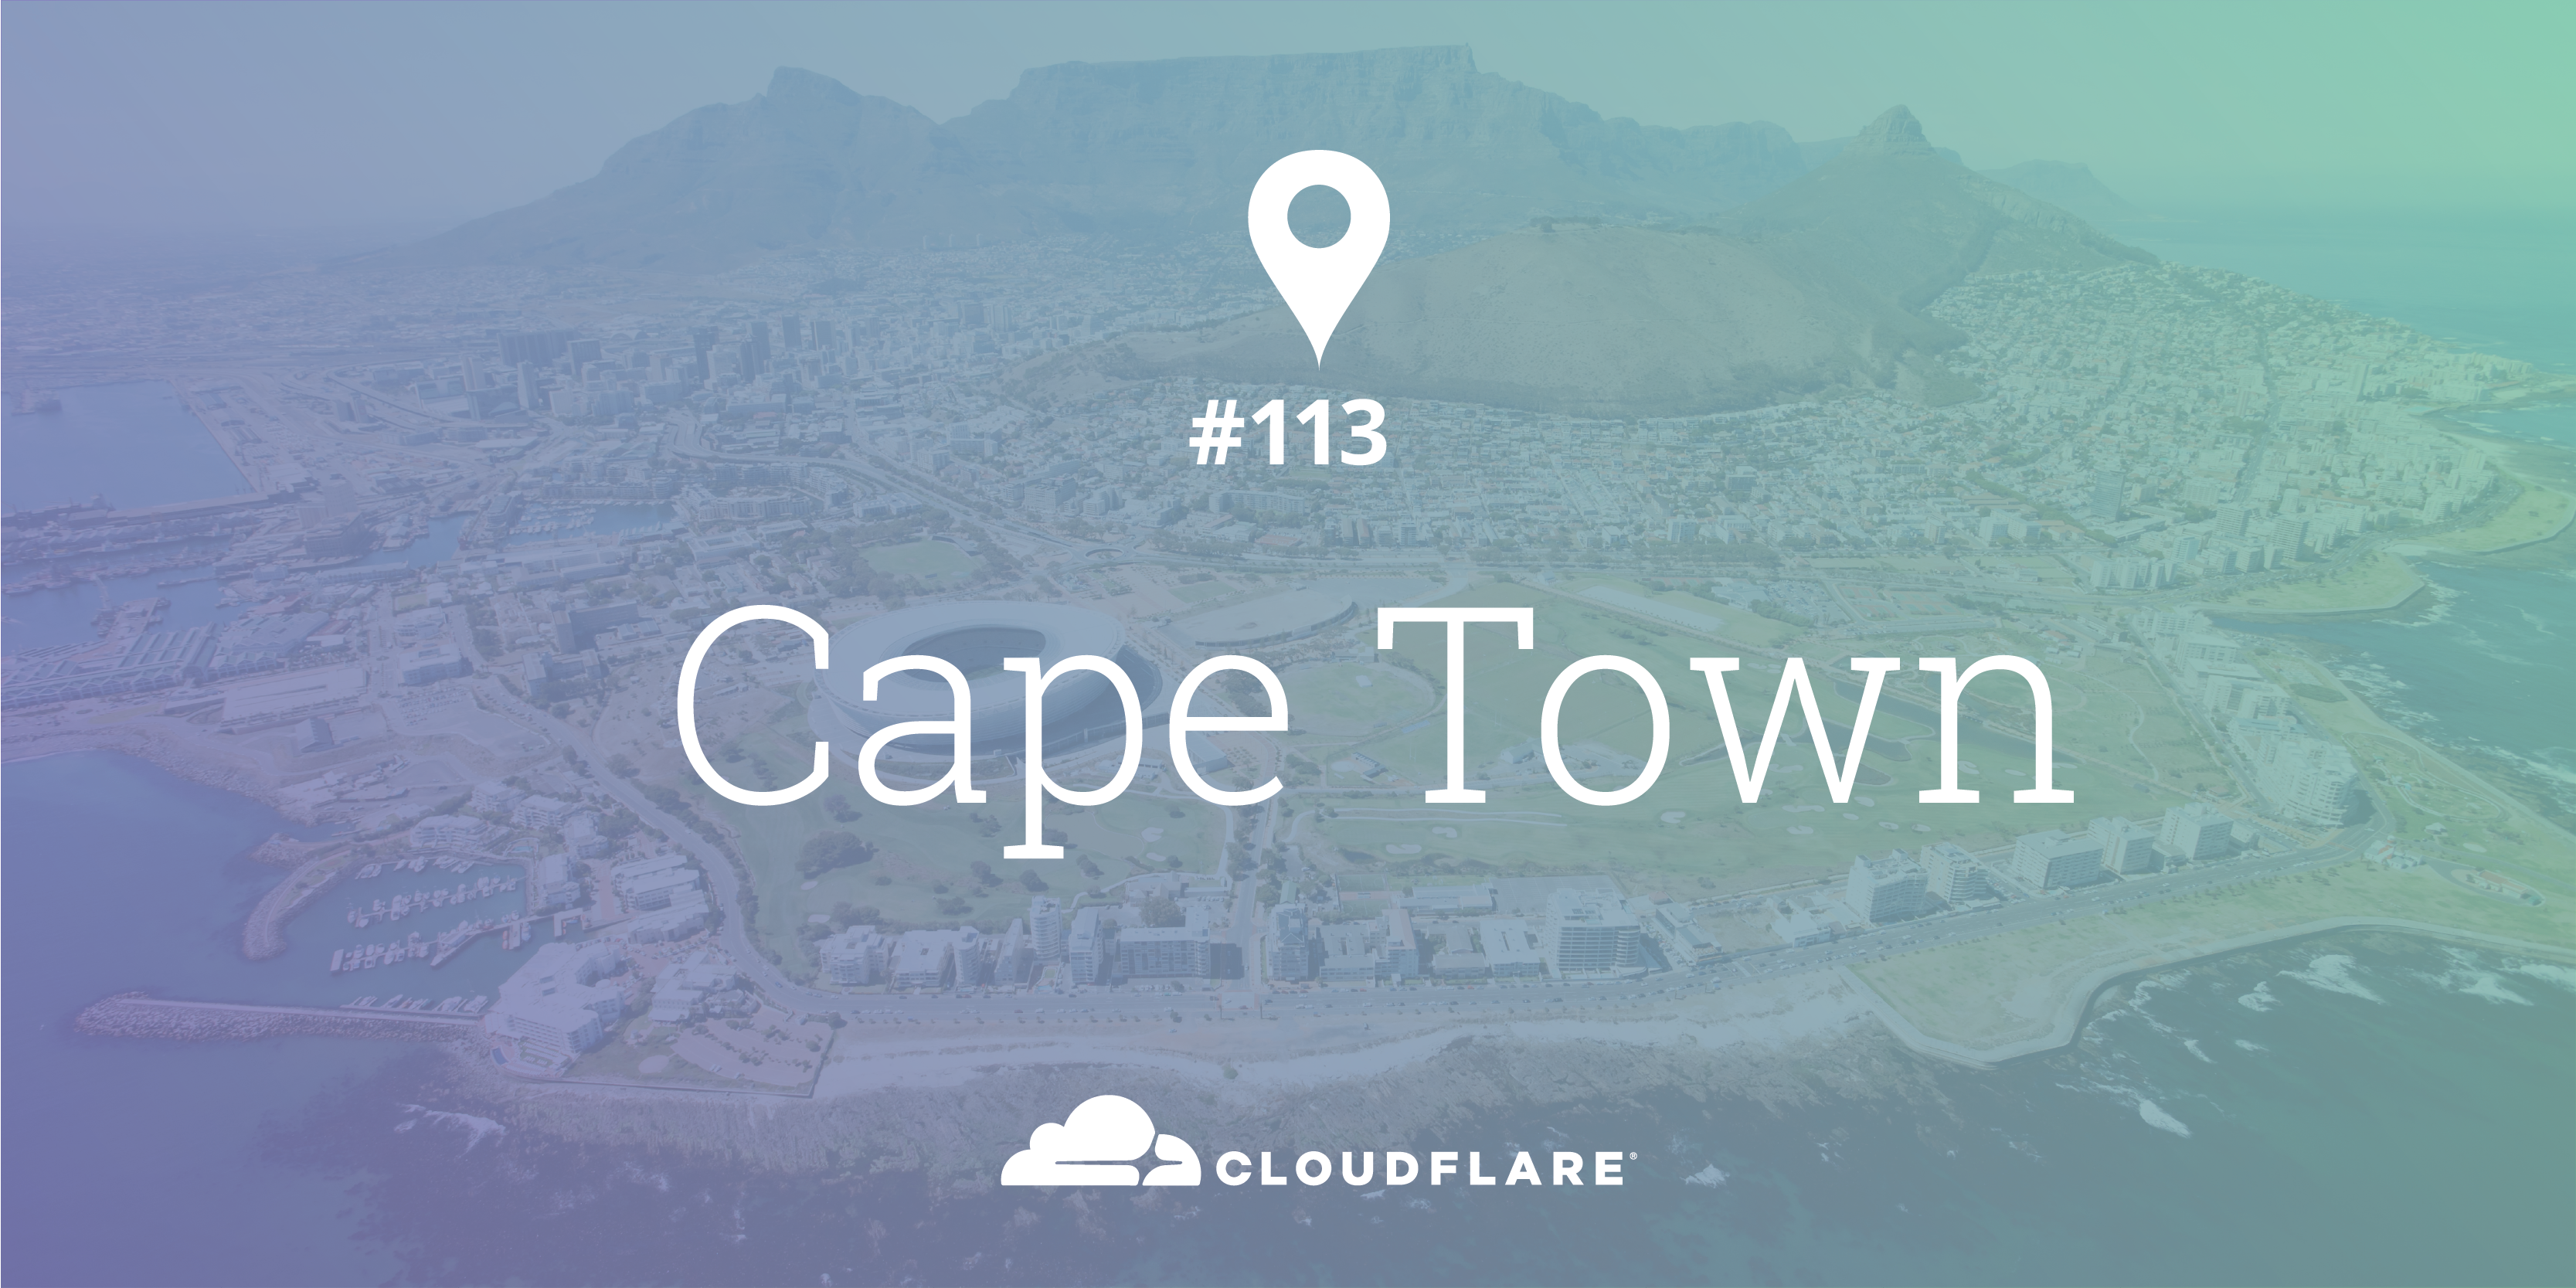 Cape Town (South Africa): Cloudflare Data Center #113